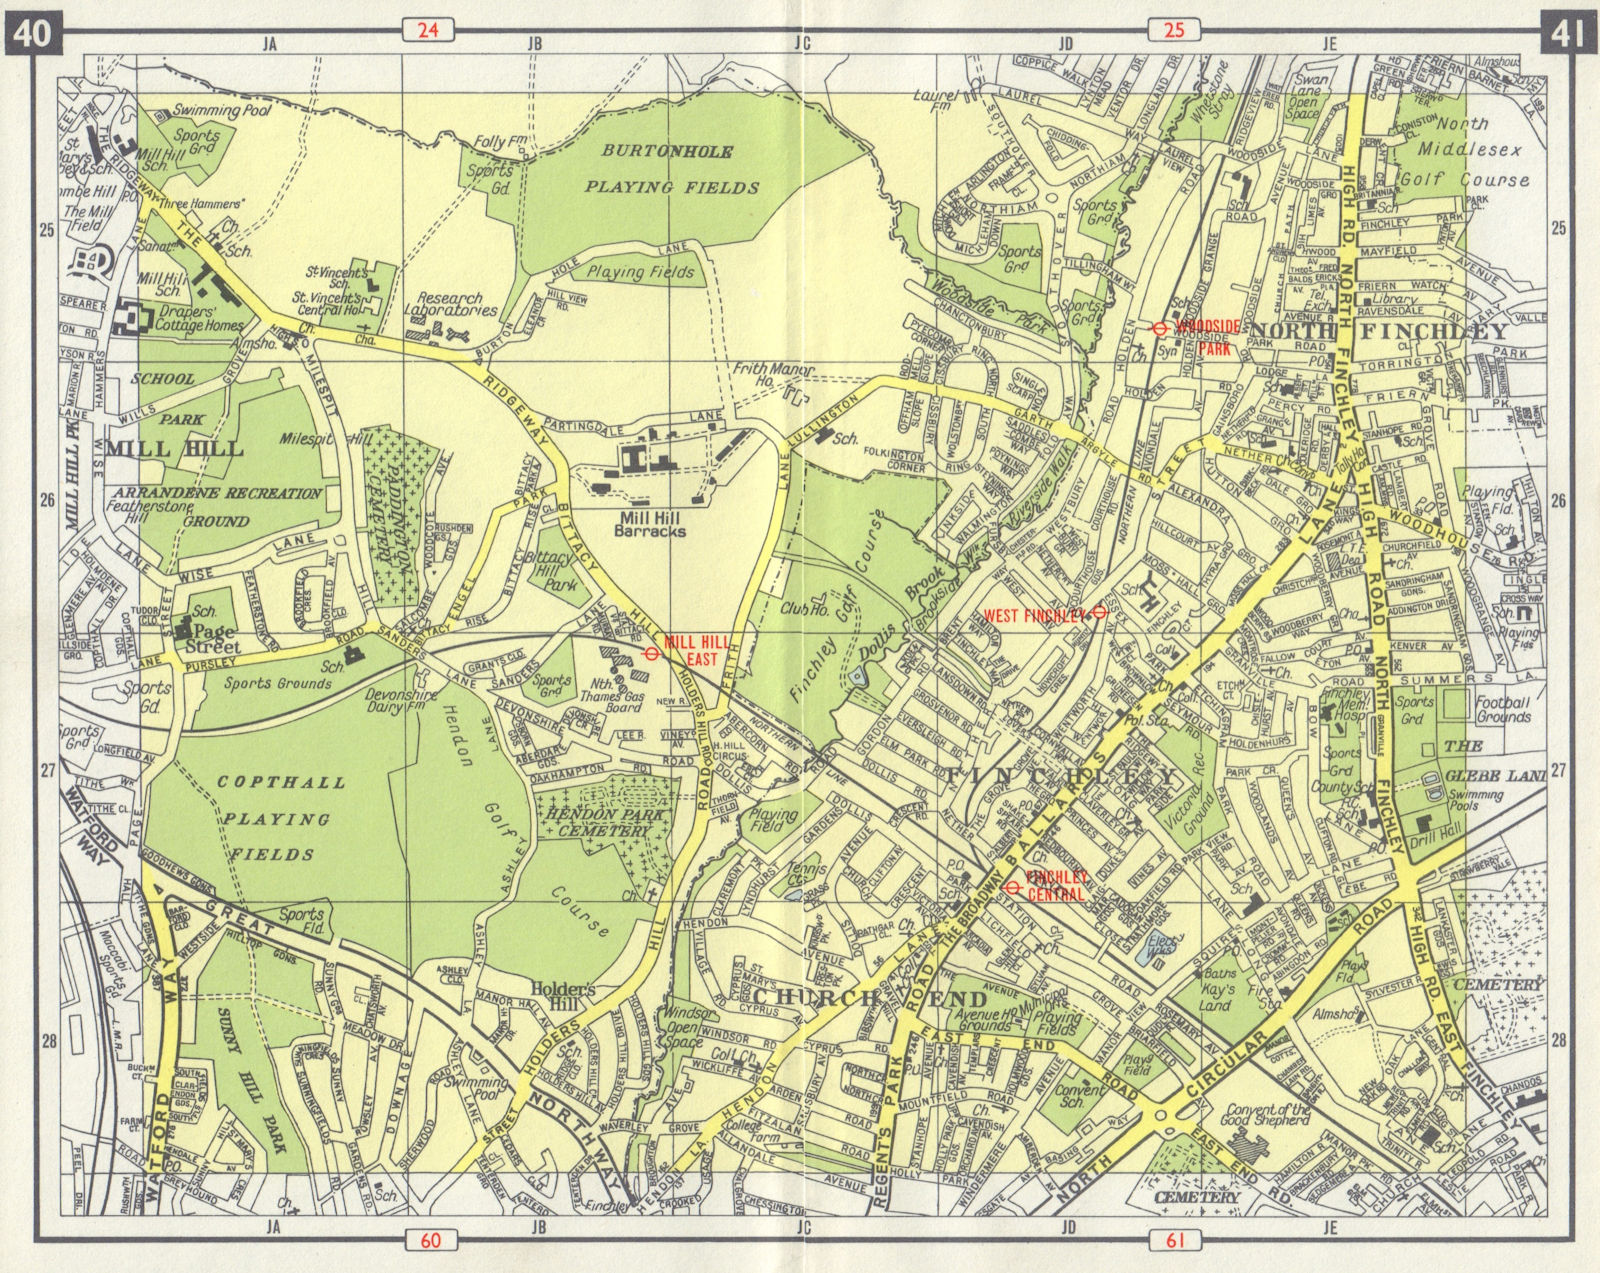 N LONDON Church End Finchley Holder's Hill Mill Hill North Finchley 1965 map